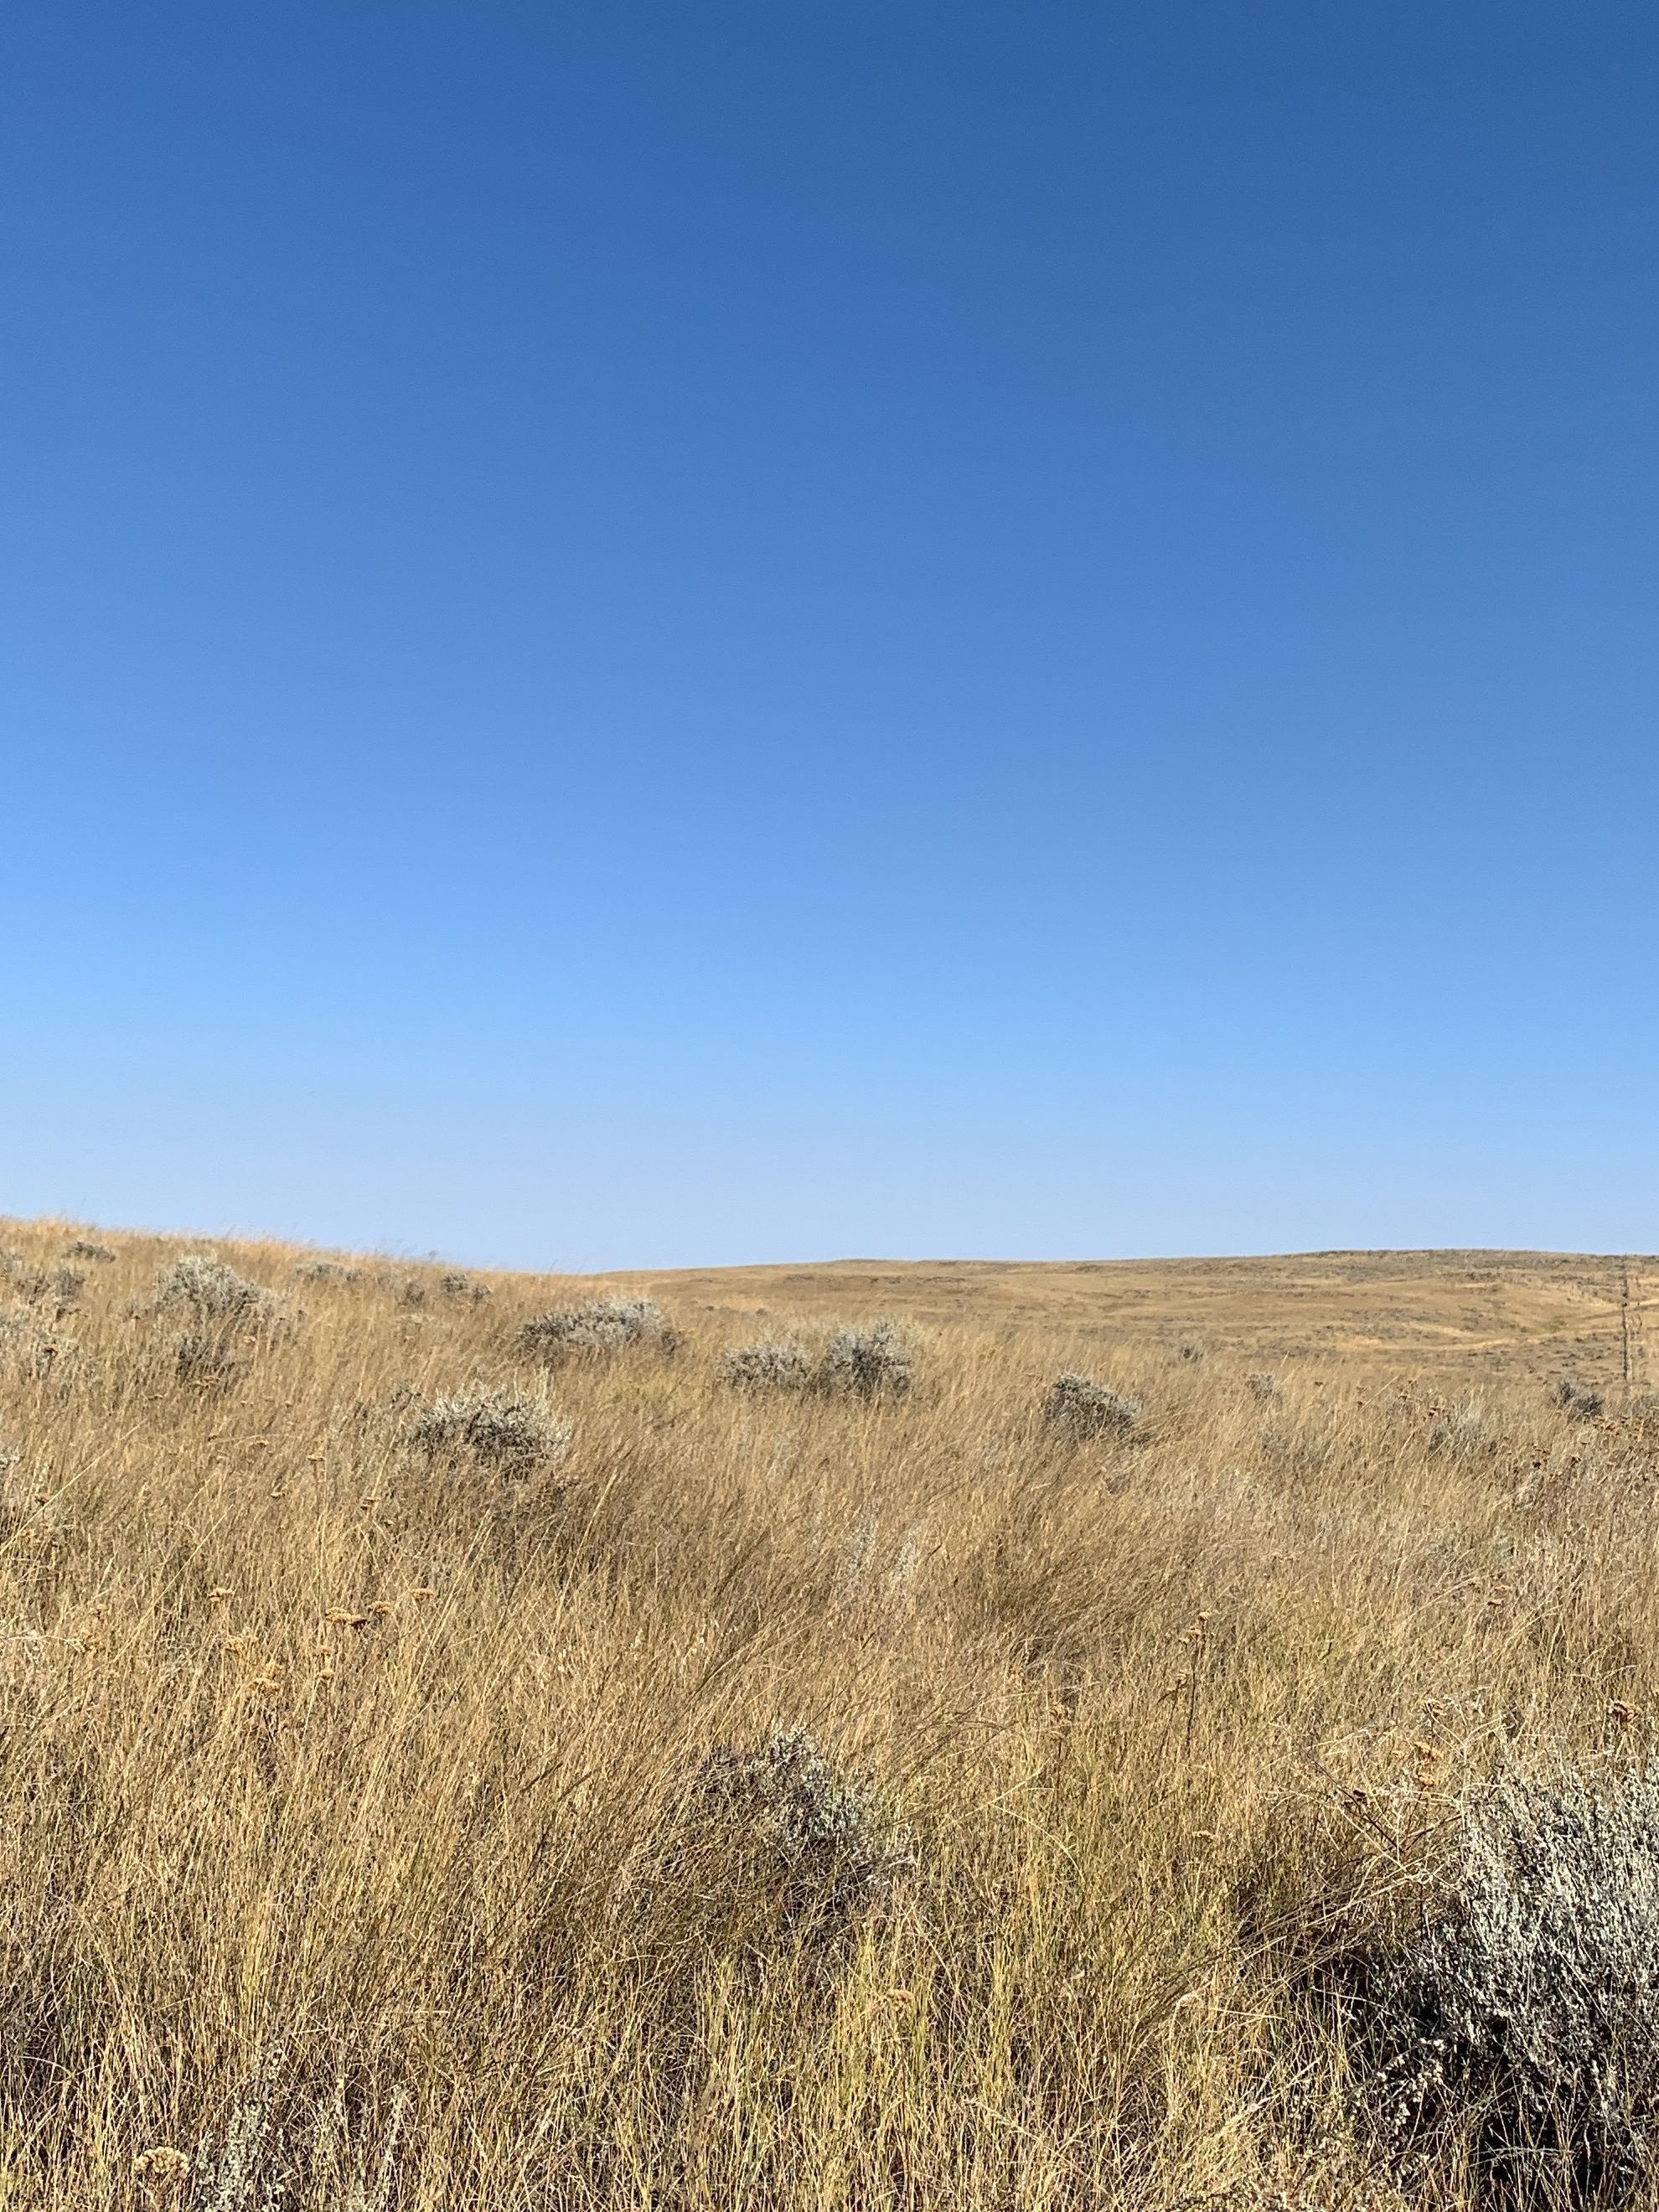 A view of a blue sky and a prairie.